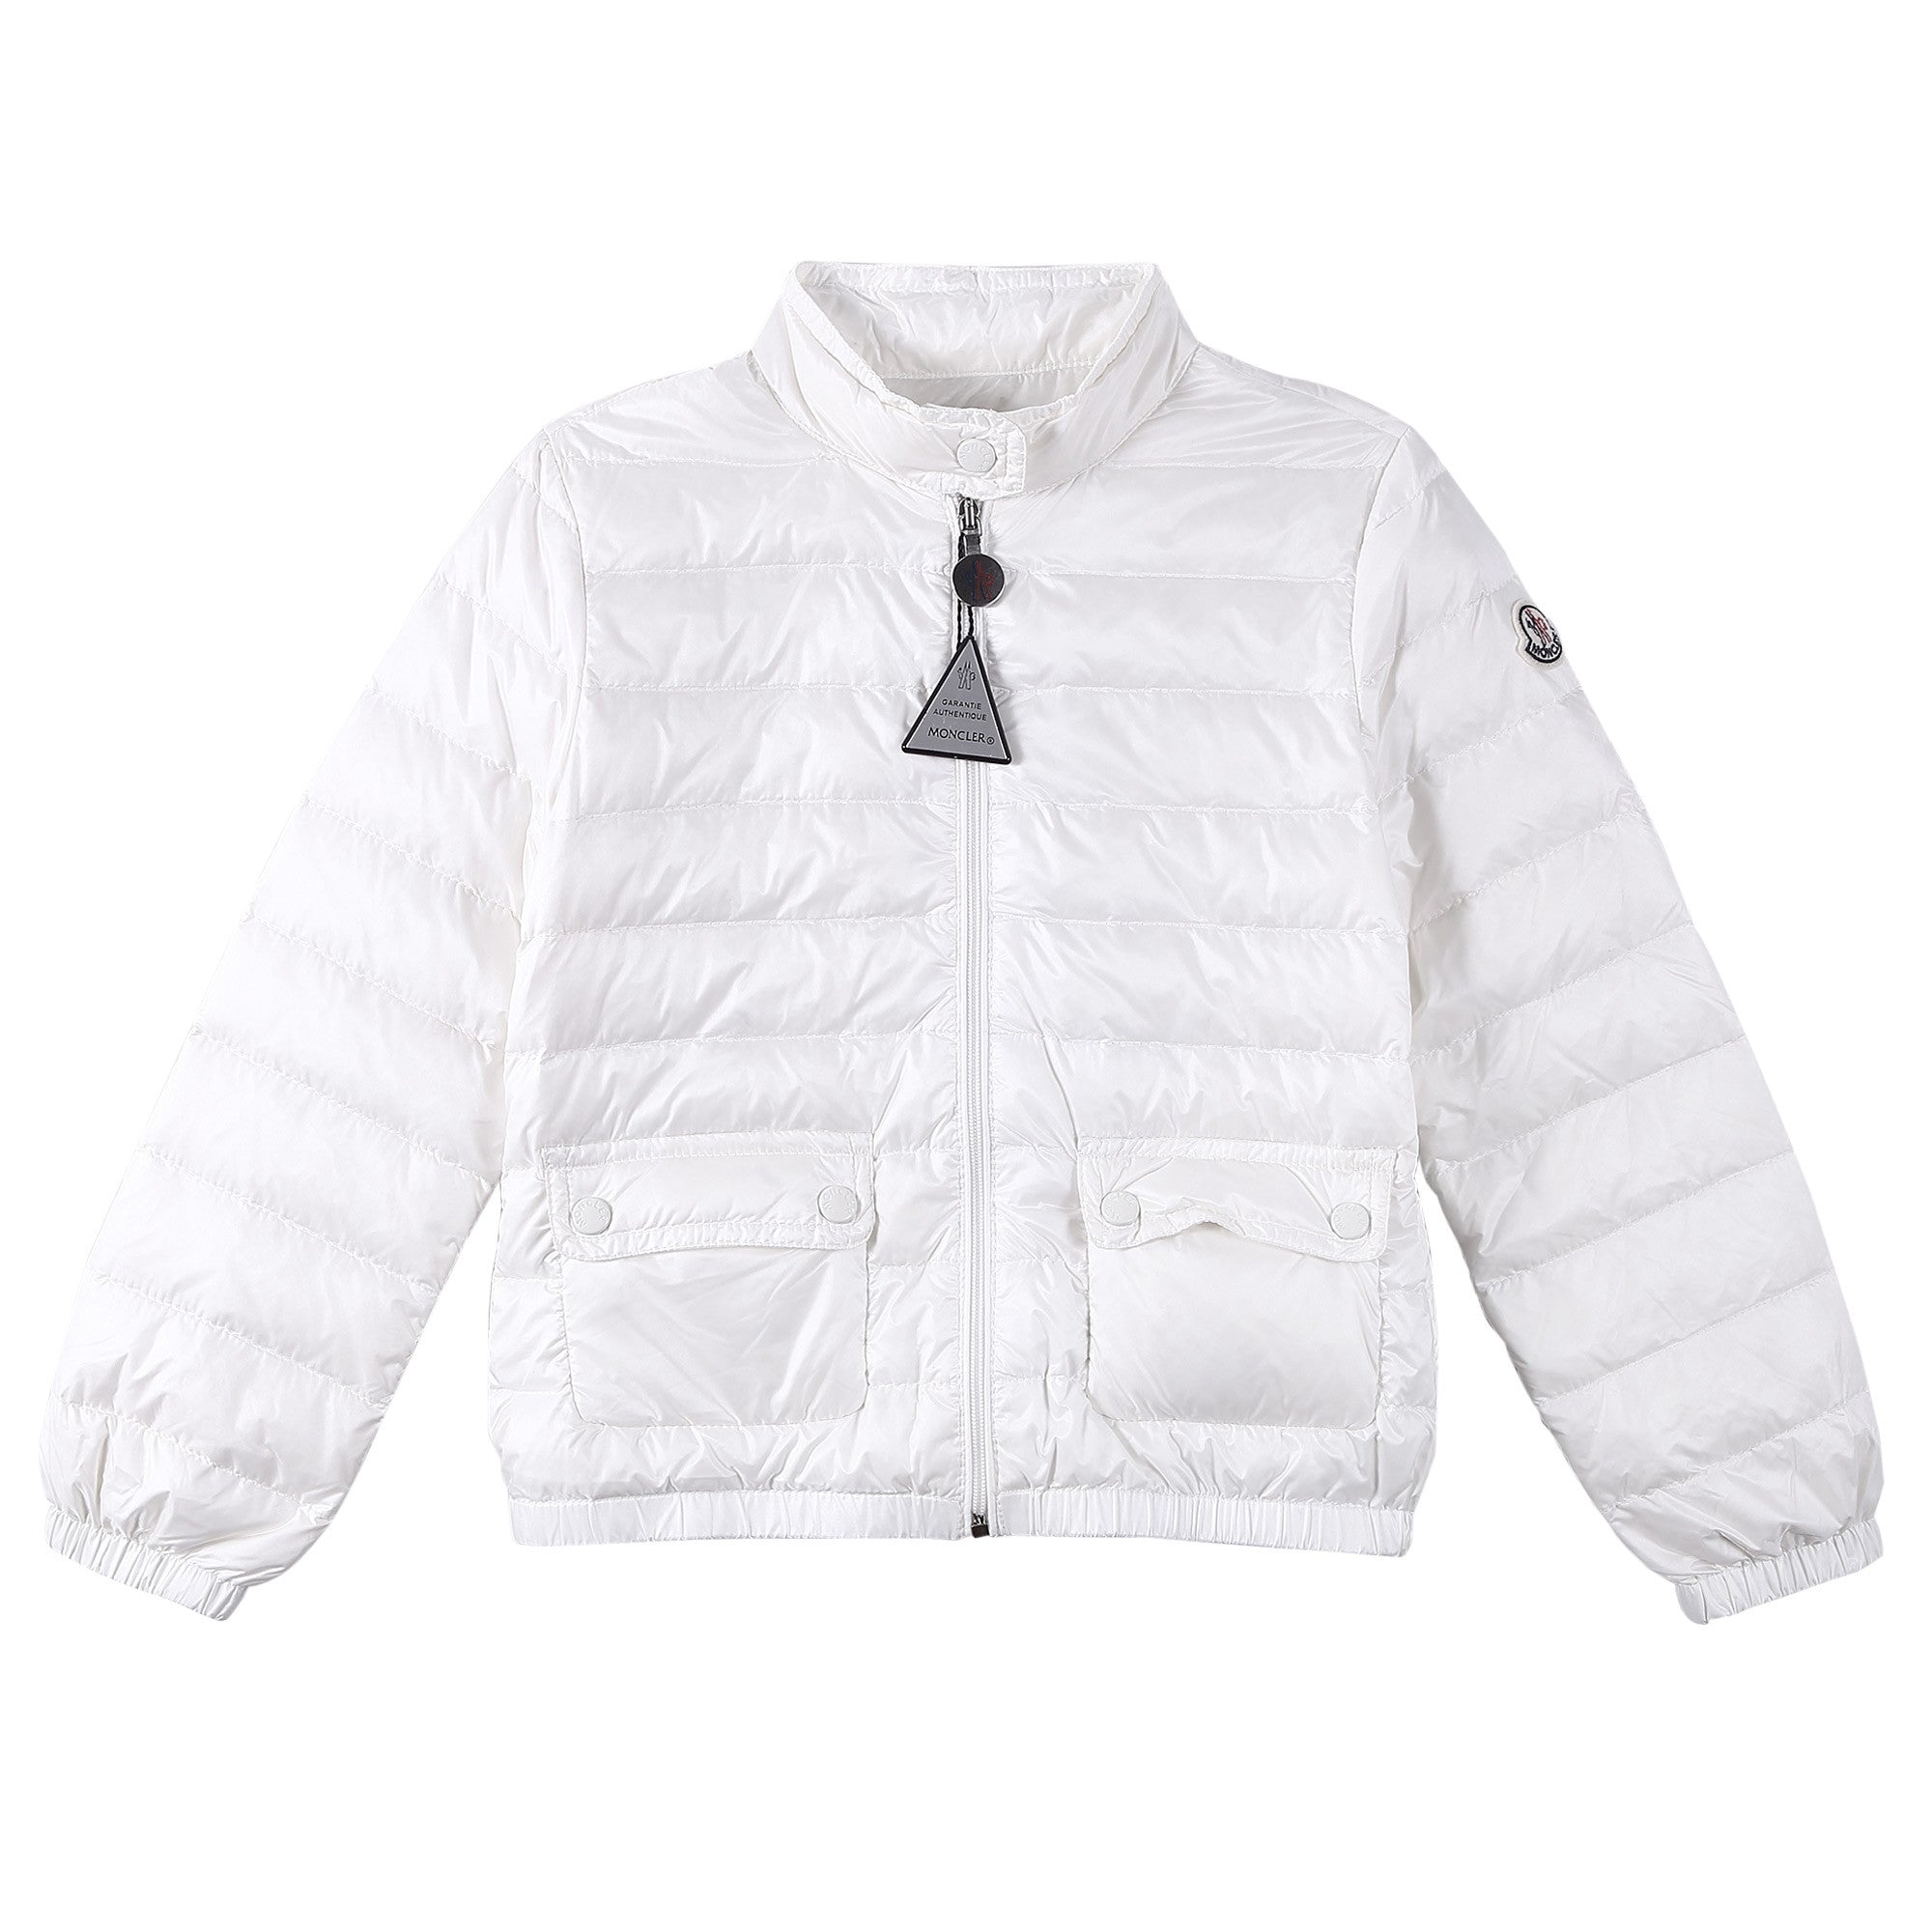 Girls White Down Padded 'Lans' Jacket With Patch Pocket - CÉMAROSE | Children's Fashion Store - 1